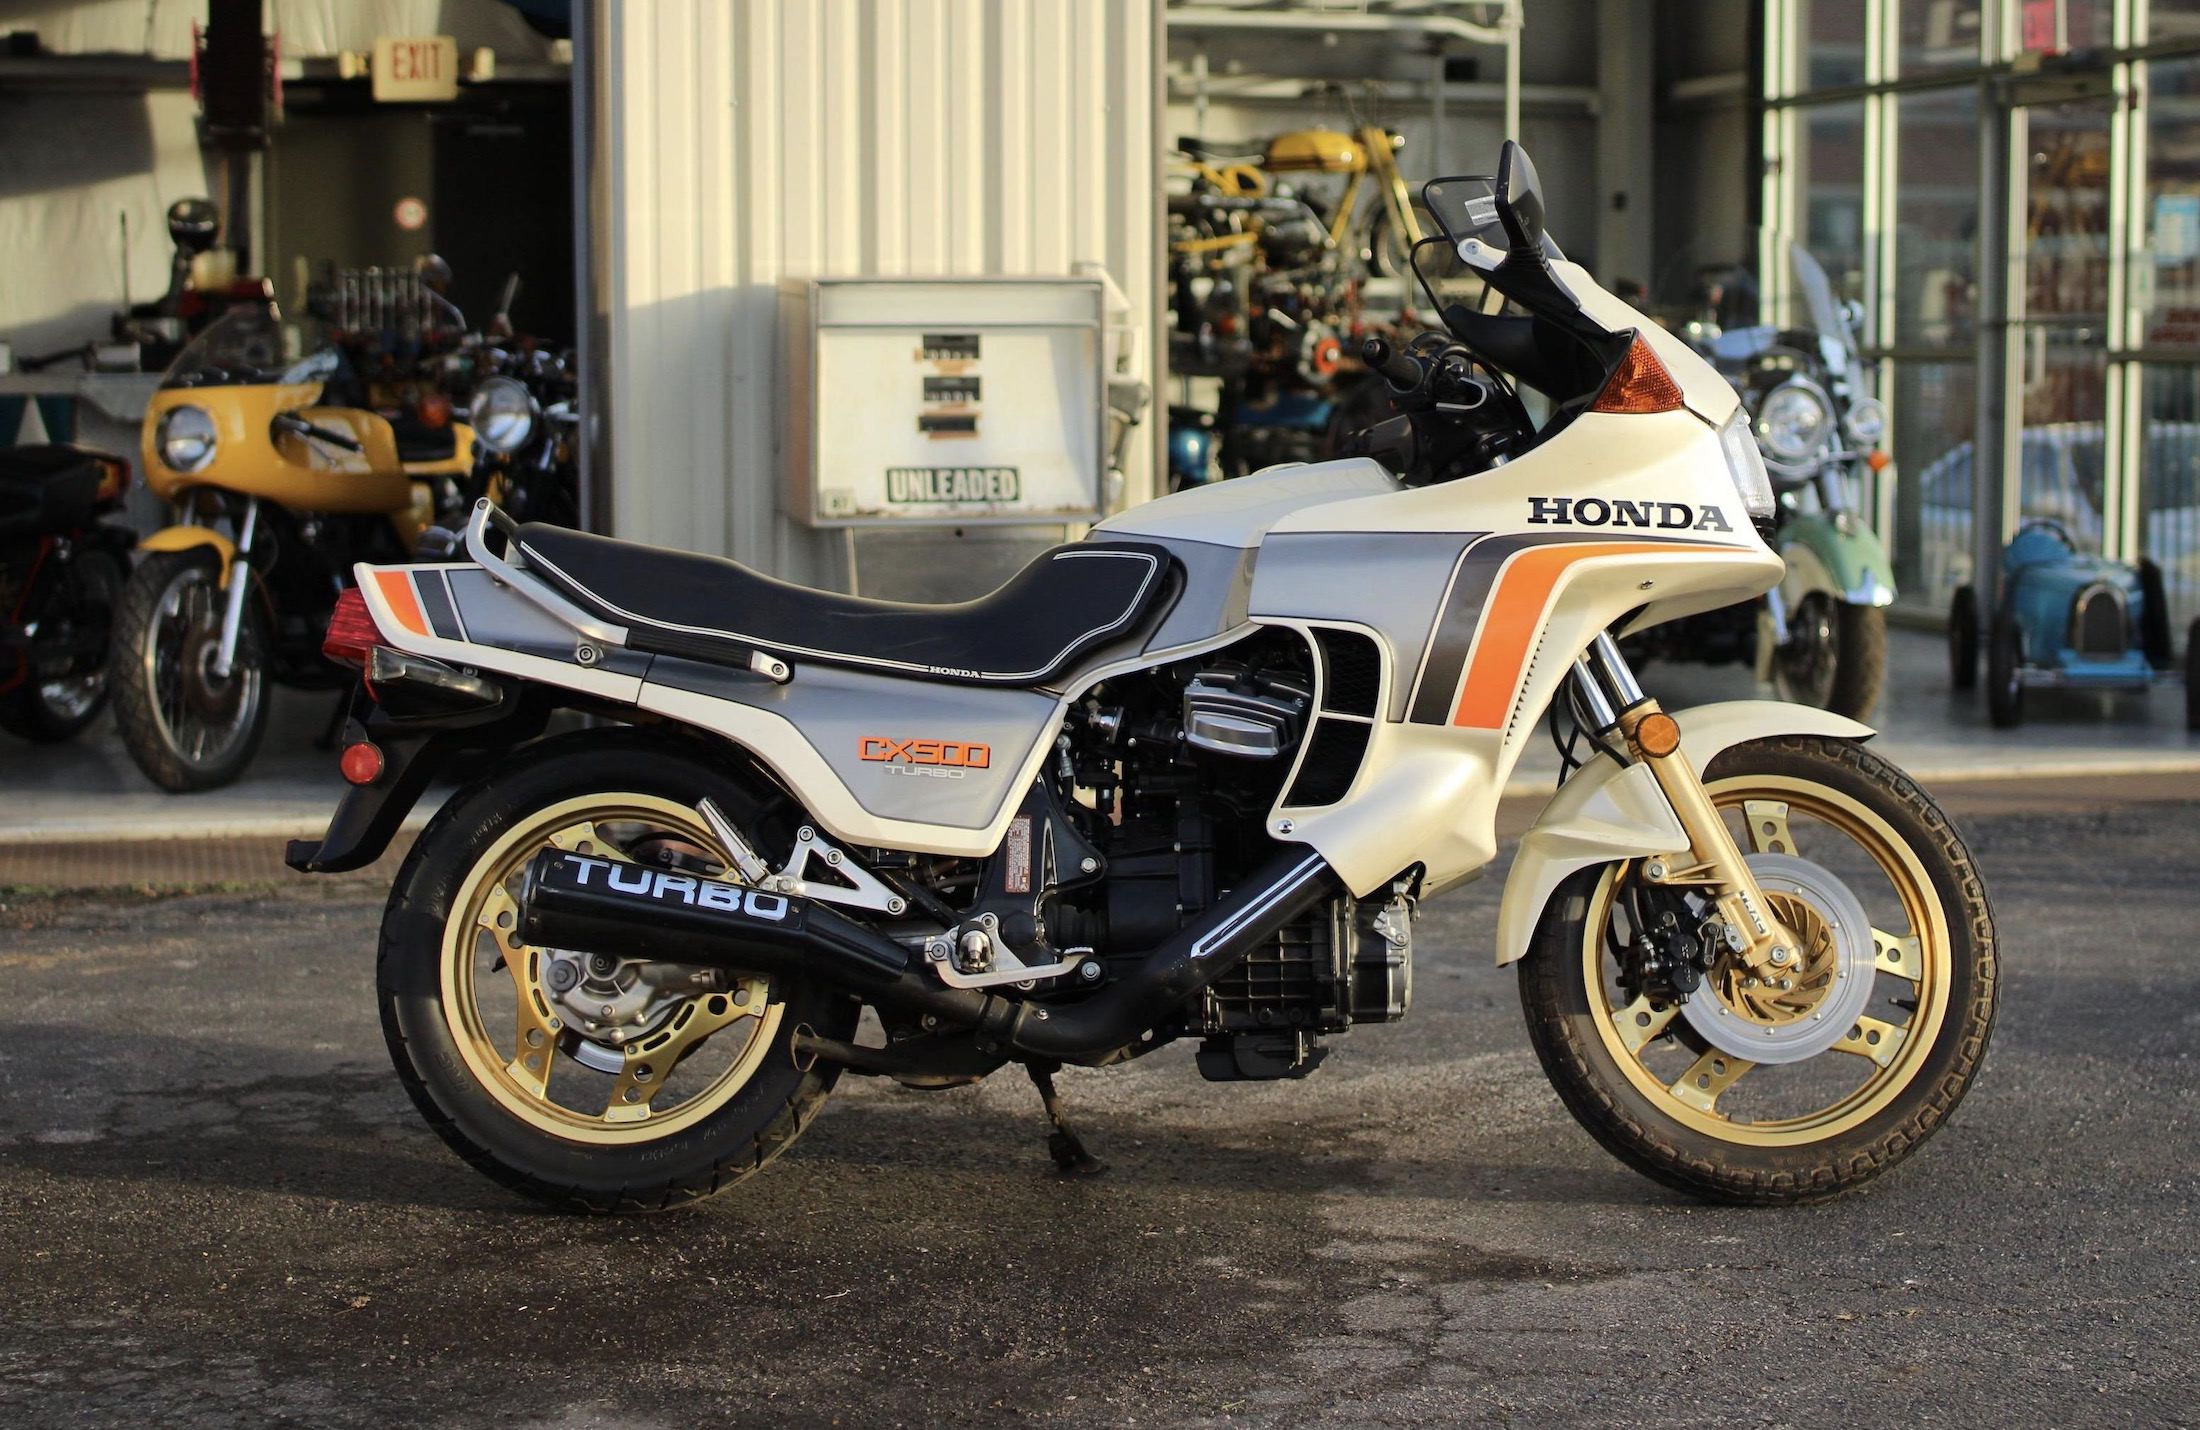 1980s Icon: Honda CX500 Turbo – The First Mass-Produced Turbocharged